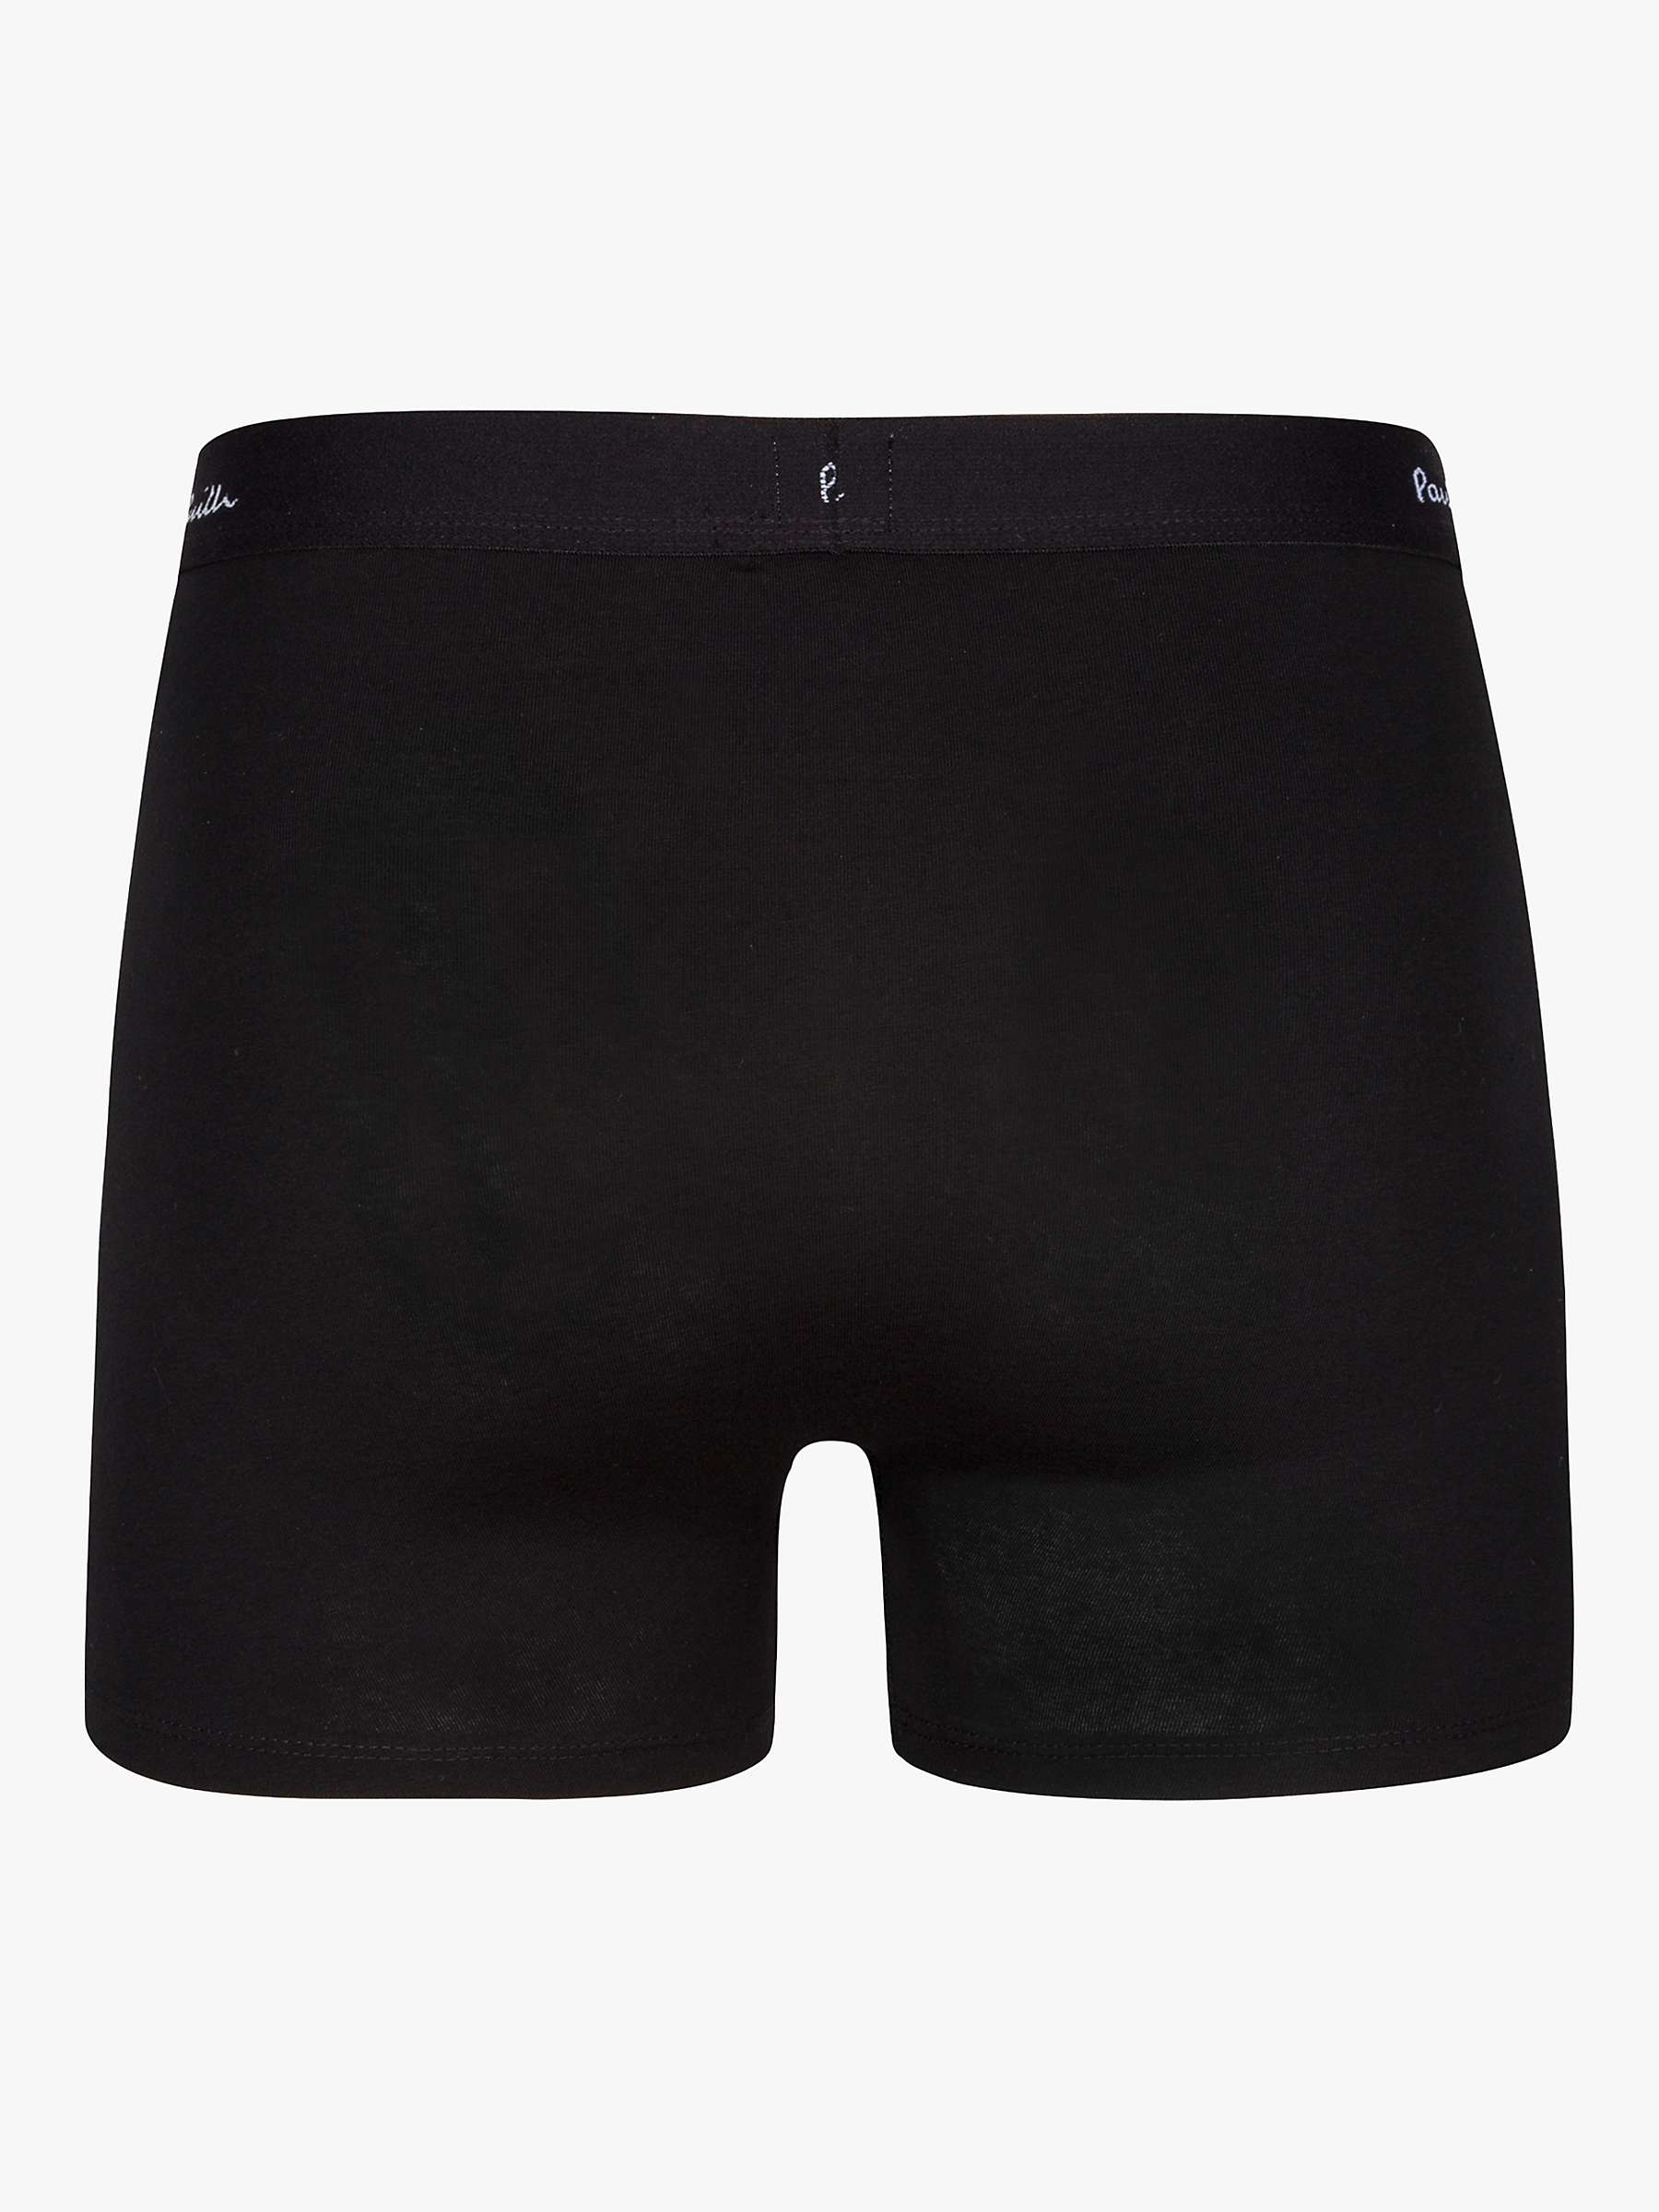 Buy Paul Smith Stretch Cotton Long Trunks, Pack of 3, Black Online at johnlewis.com